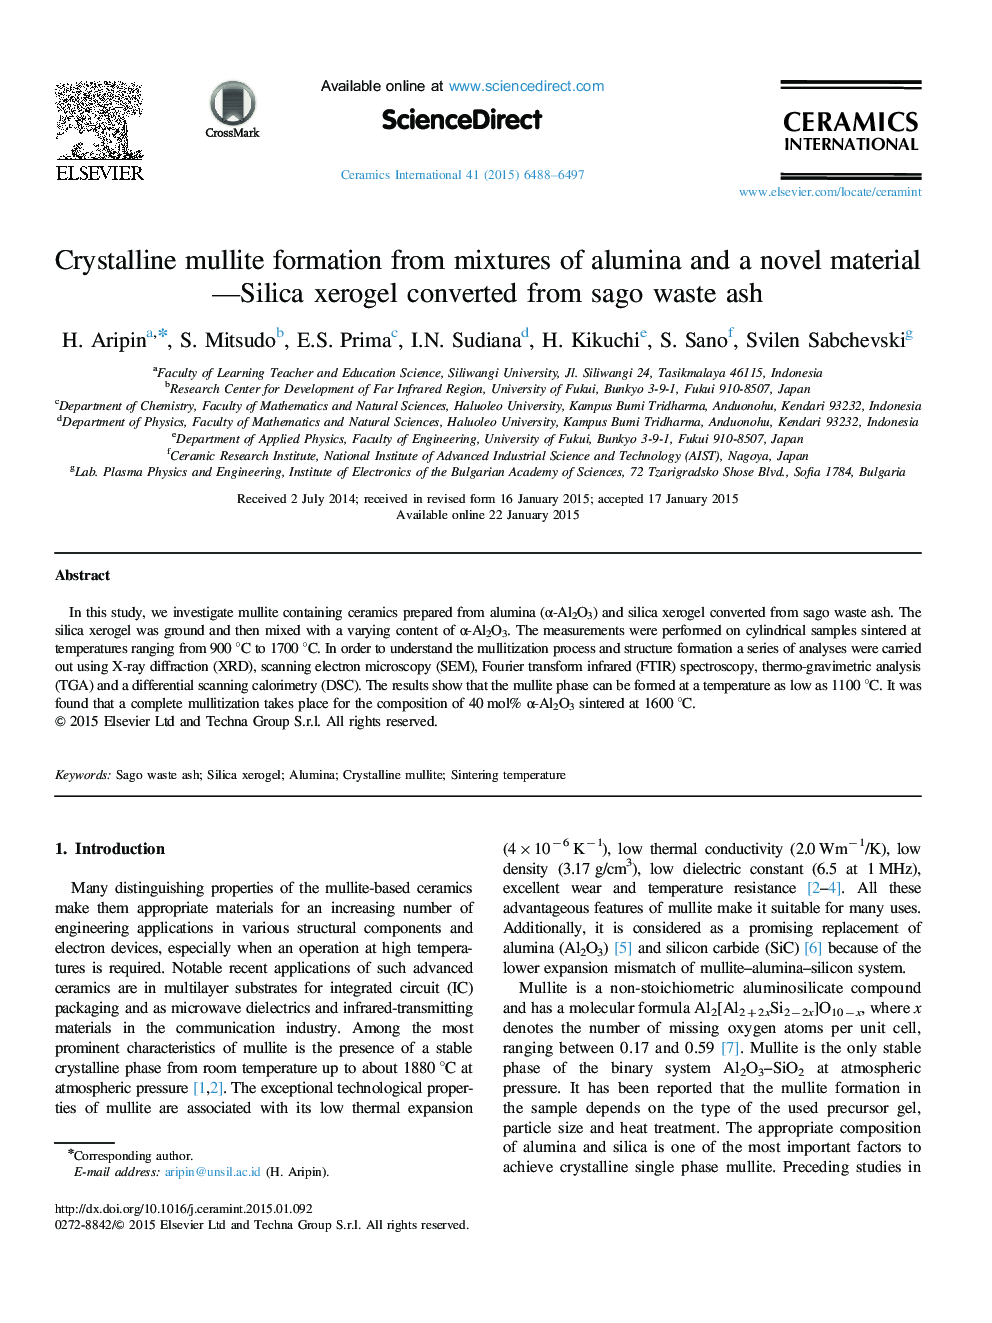 Crystalline mullite formation from mixtures of alumina and a novel material—Silica xerogel converted from sago waste ash